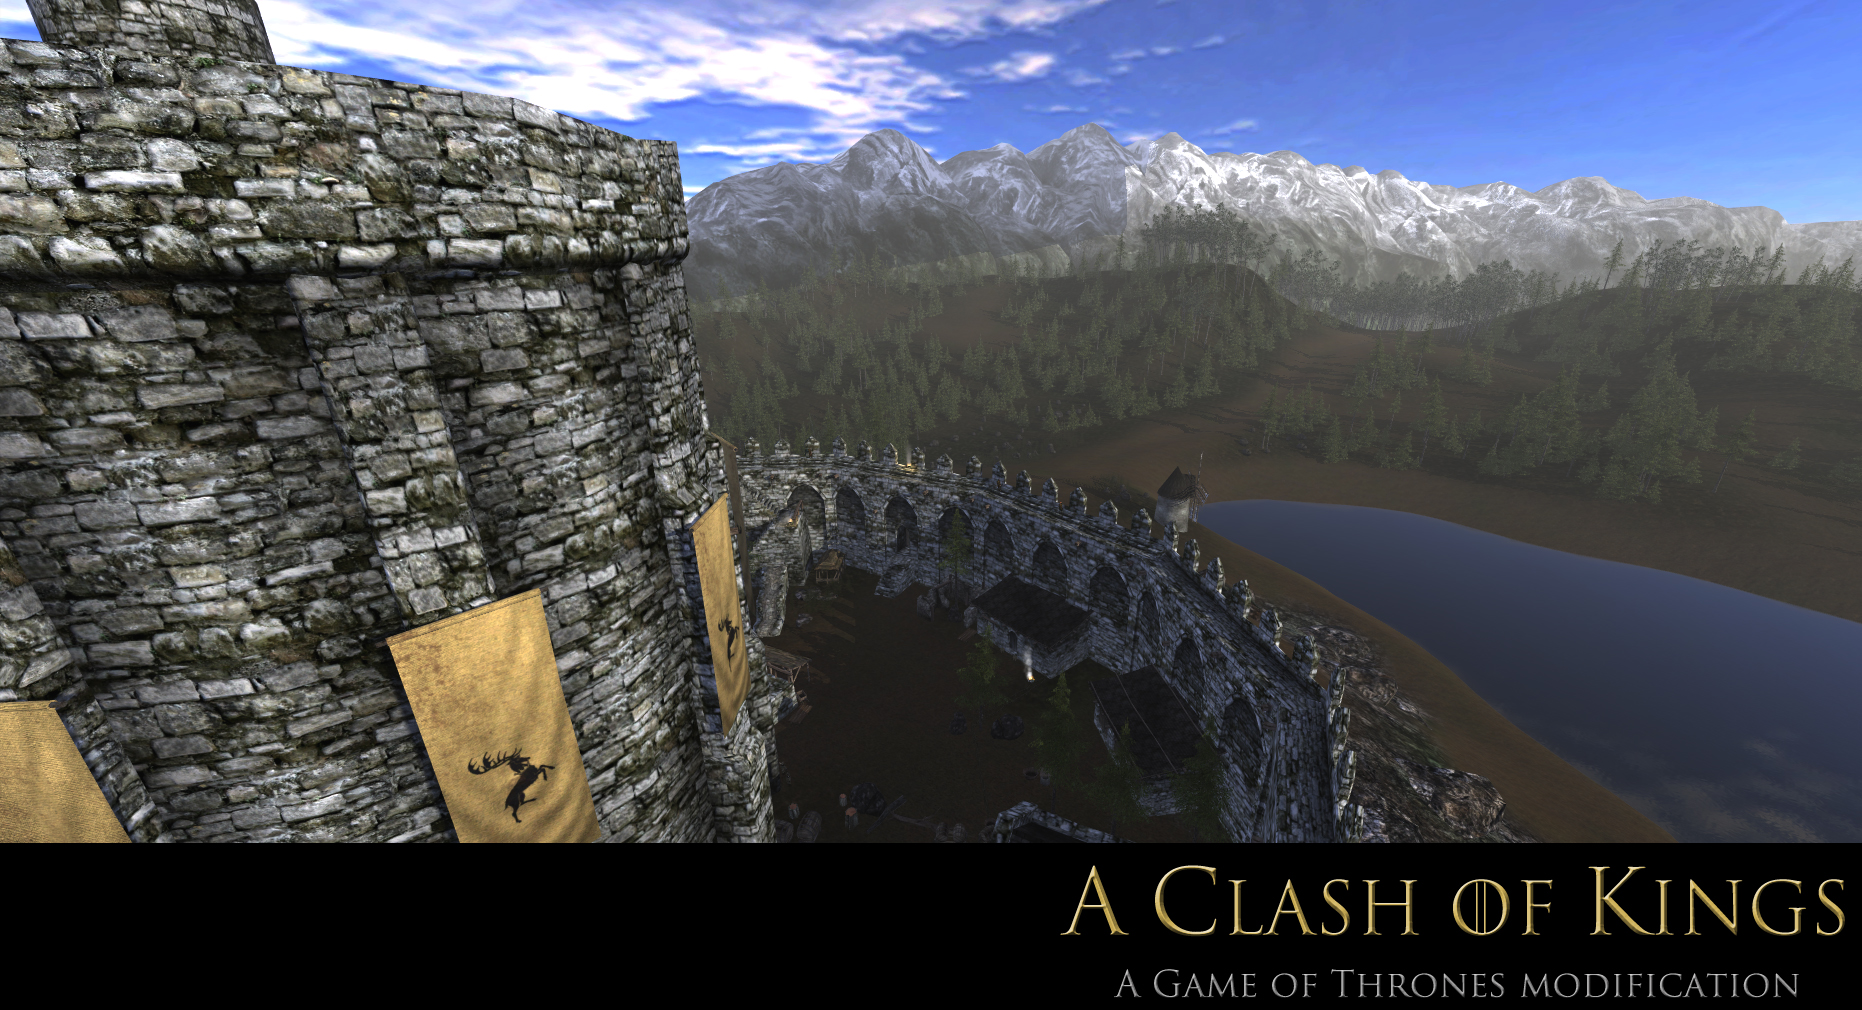 Mount & Blade: Warband. A Clash of Kings (Game of Thrones) 6.0